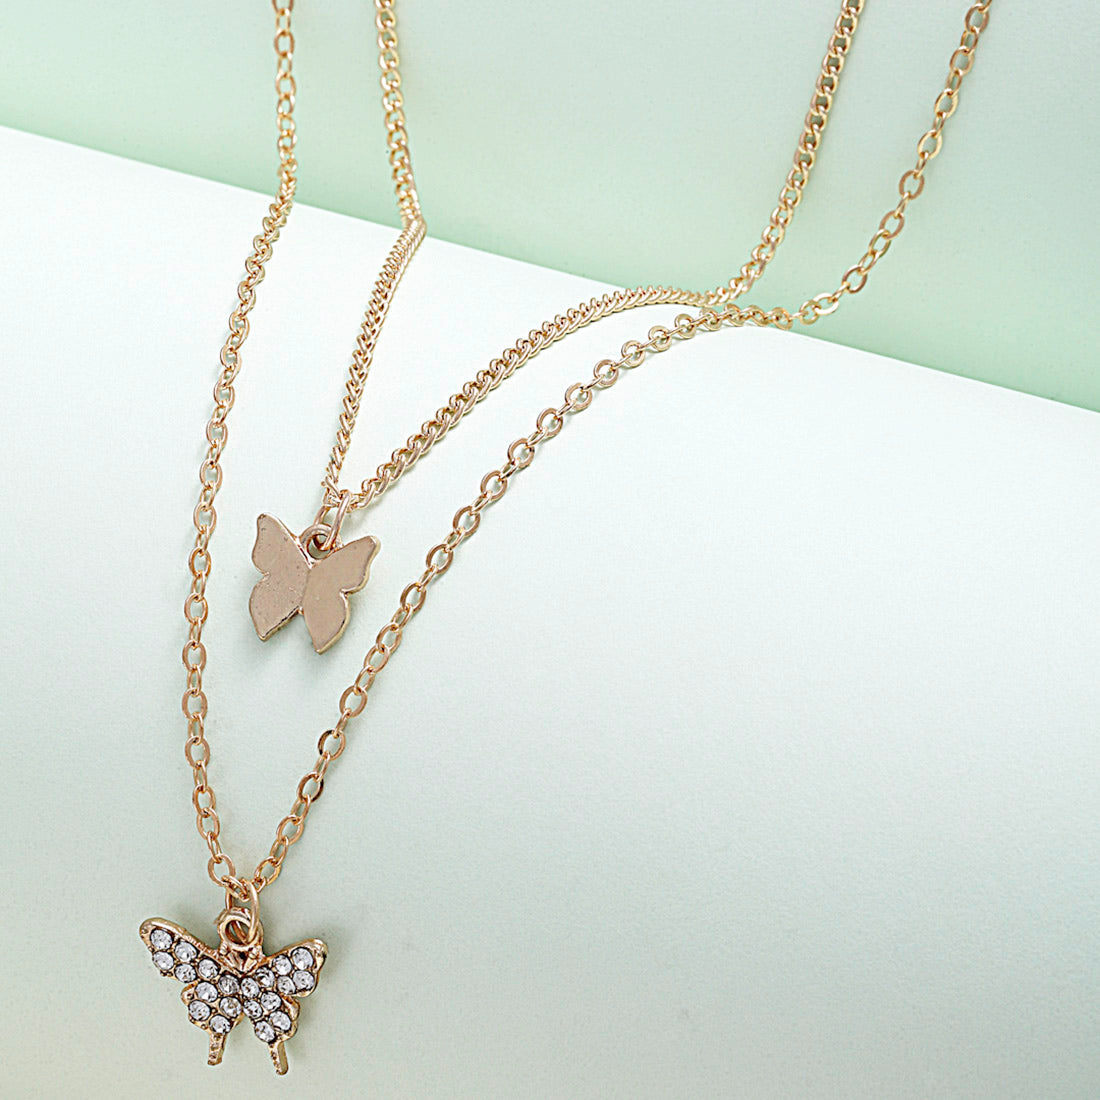 Lucid Butterfly Layered Necklace